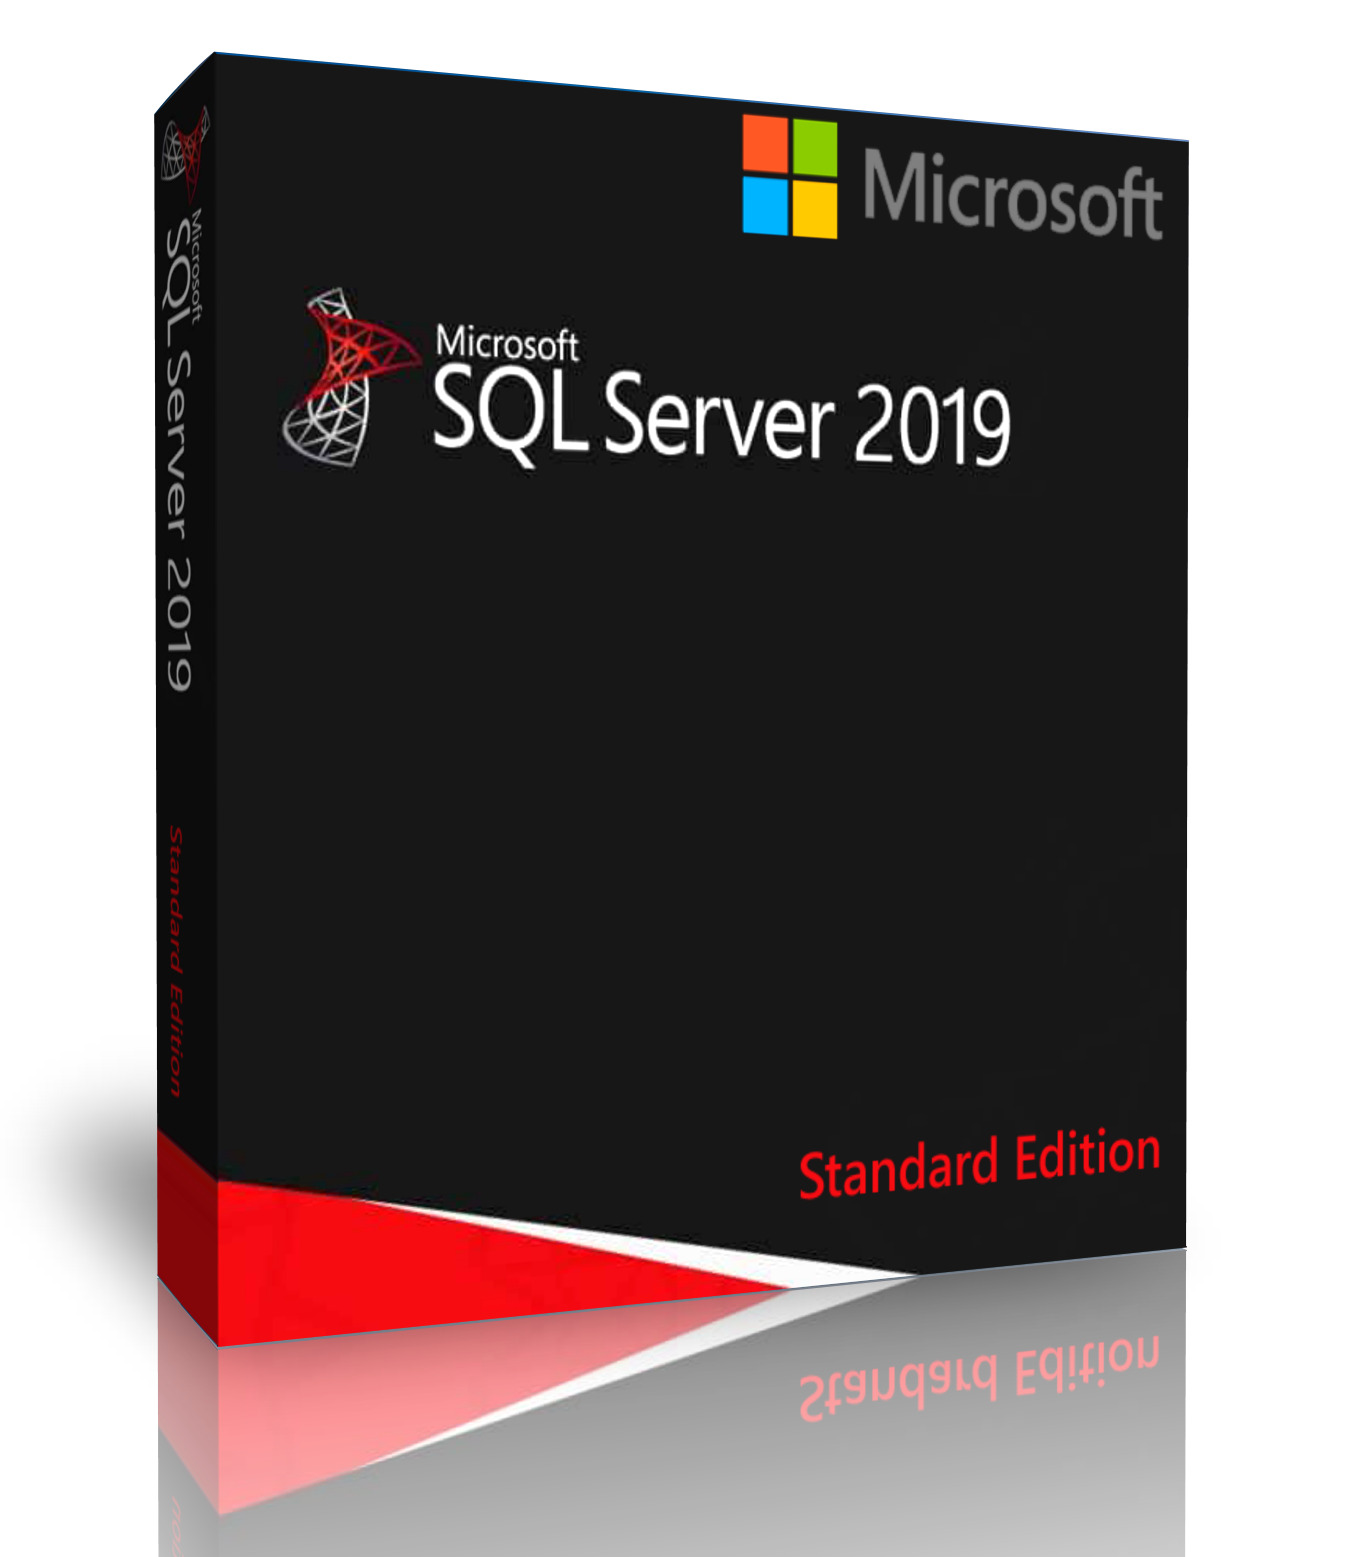 Microsoft SQL Server 2019 Standard with 16 Core License, unlimited User CALs